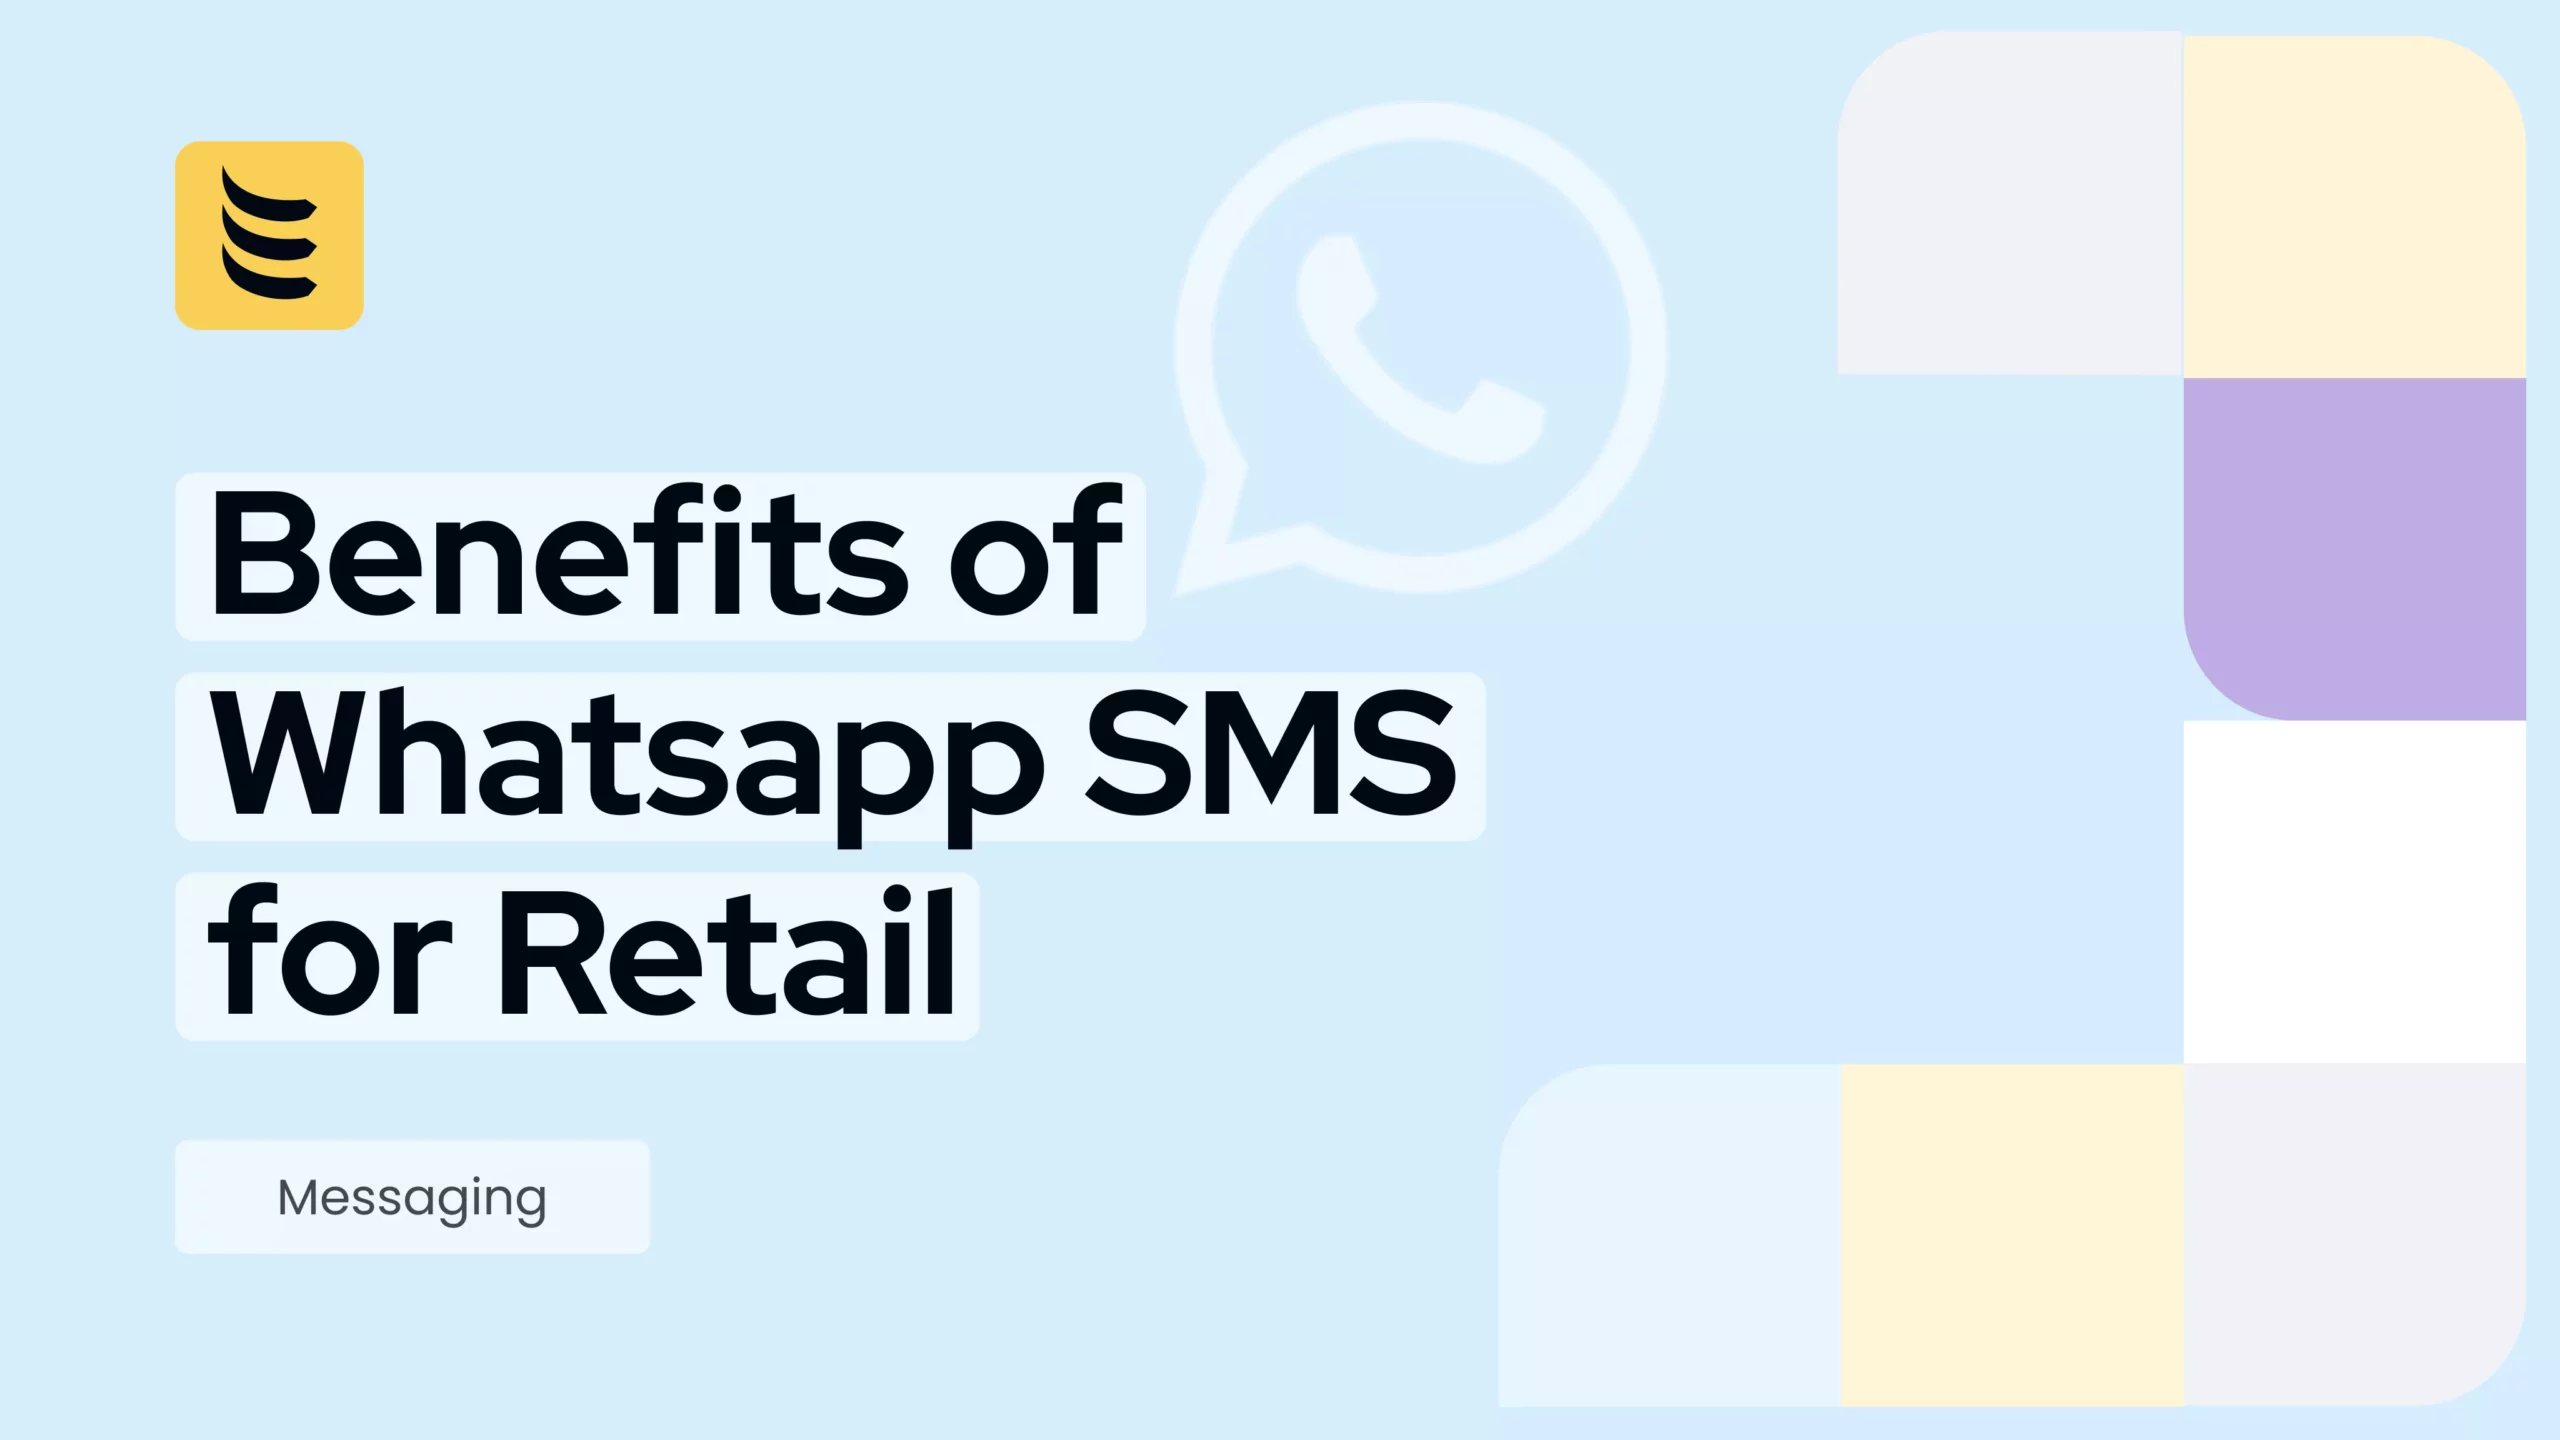 11 Marketing Benefits of Whatsapp Messaging for Retail Business